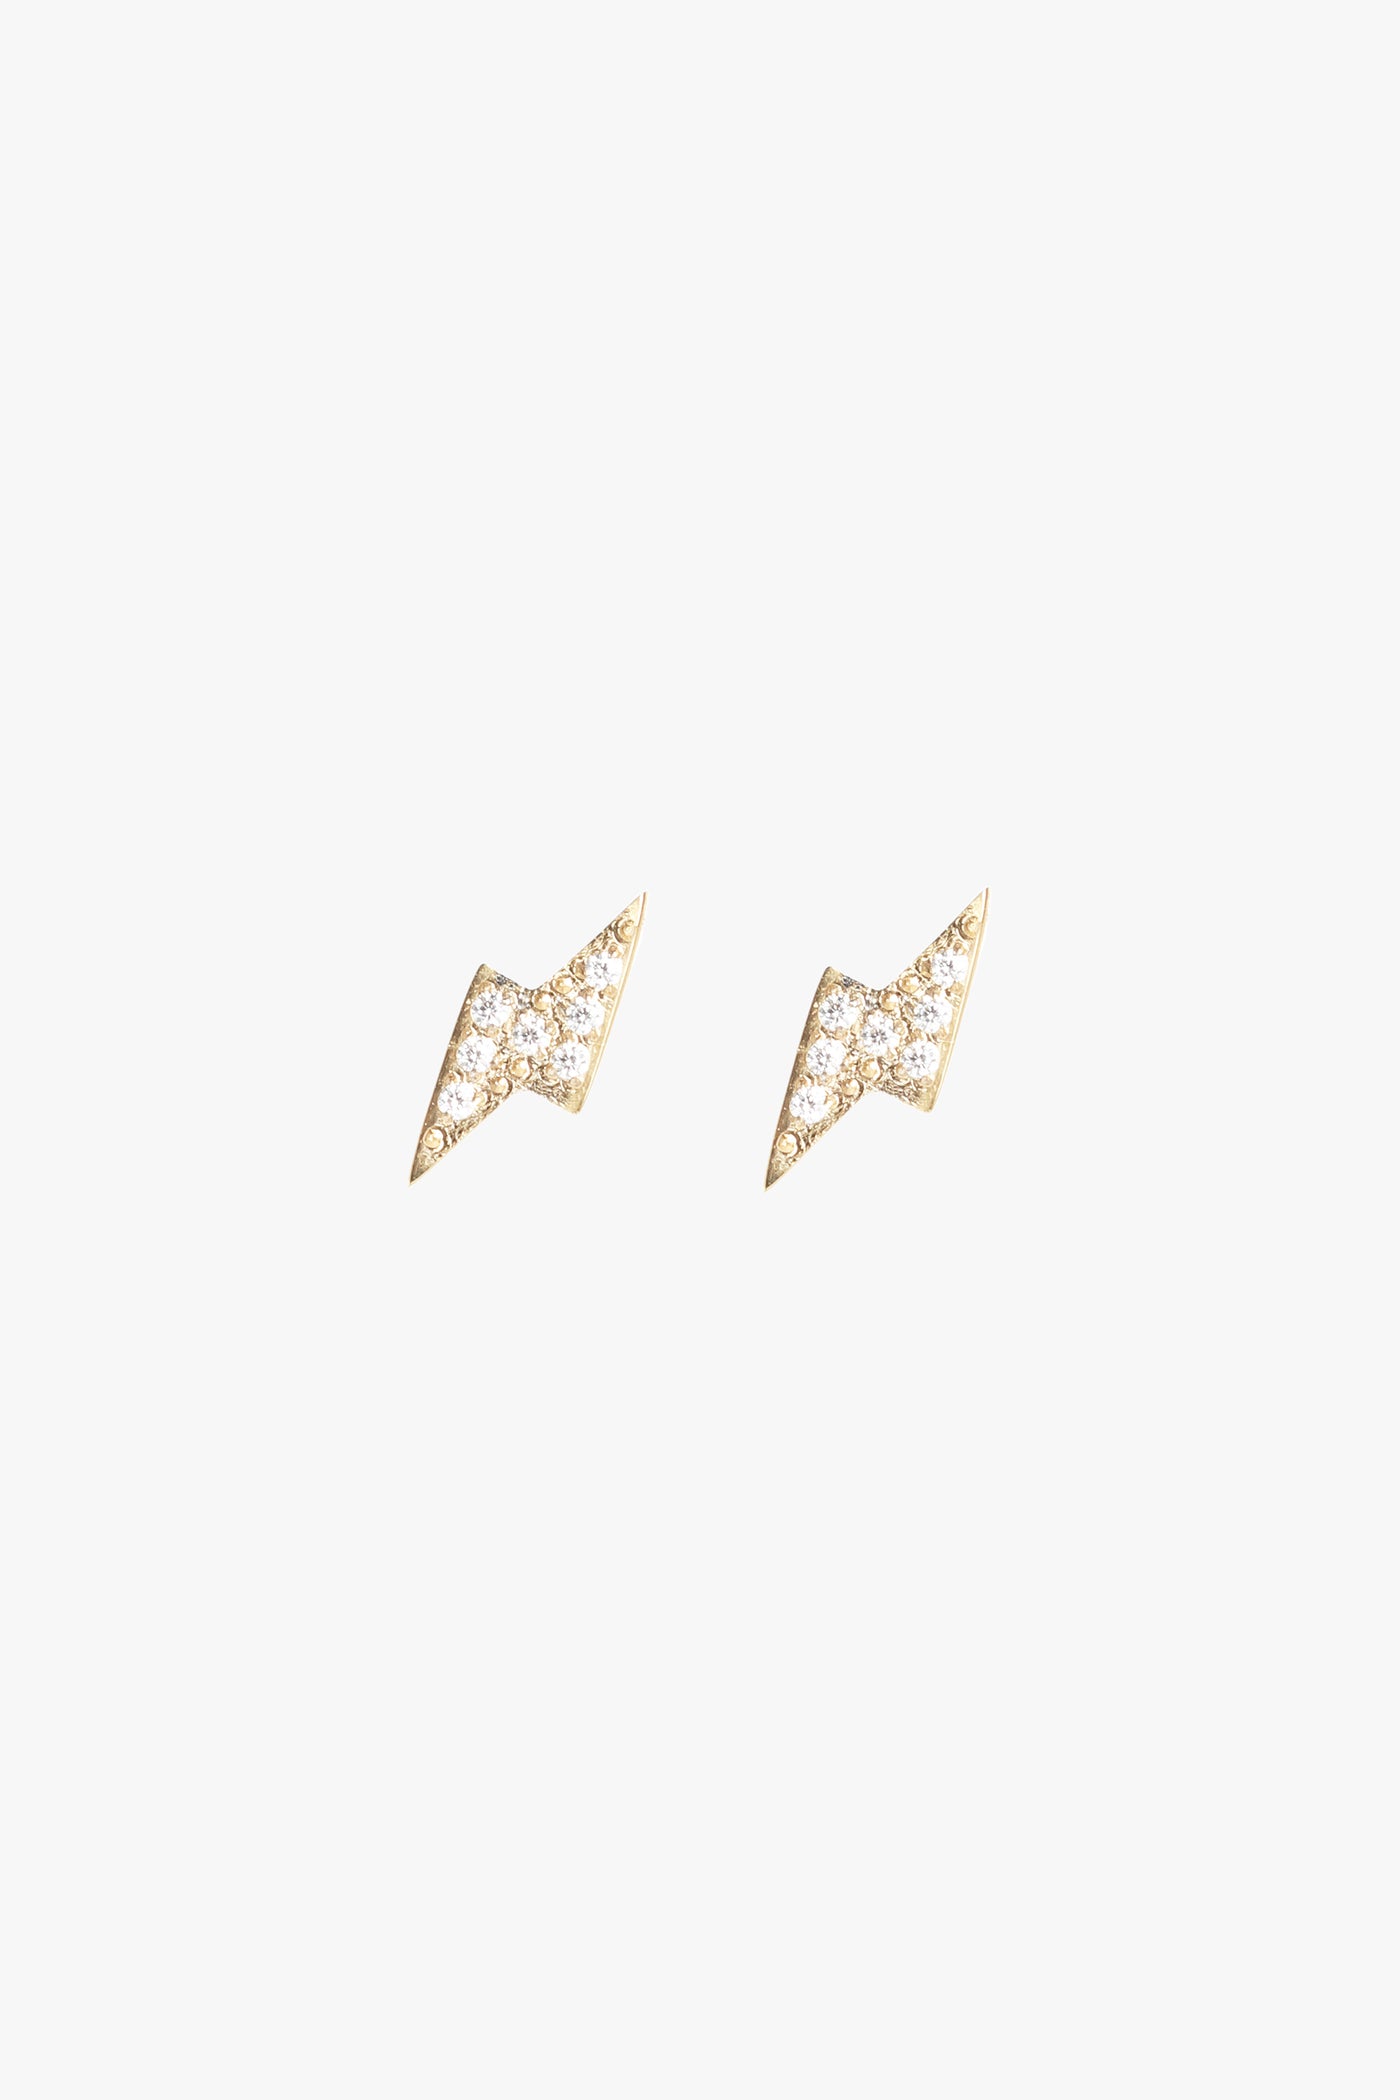 Marrin Costello Jewelry Bolt Studs lightning bolt CZ post back earrings — for pierced ears. Waterproof, sustainable, hypoallergenic. 14k gold plated stainless steel.